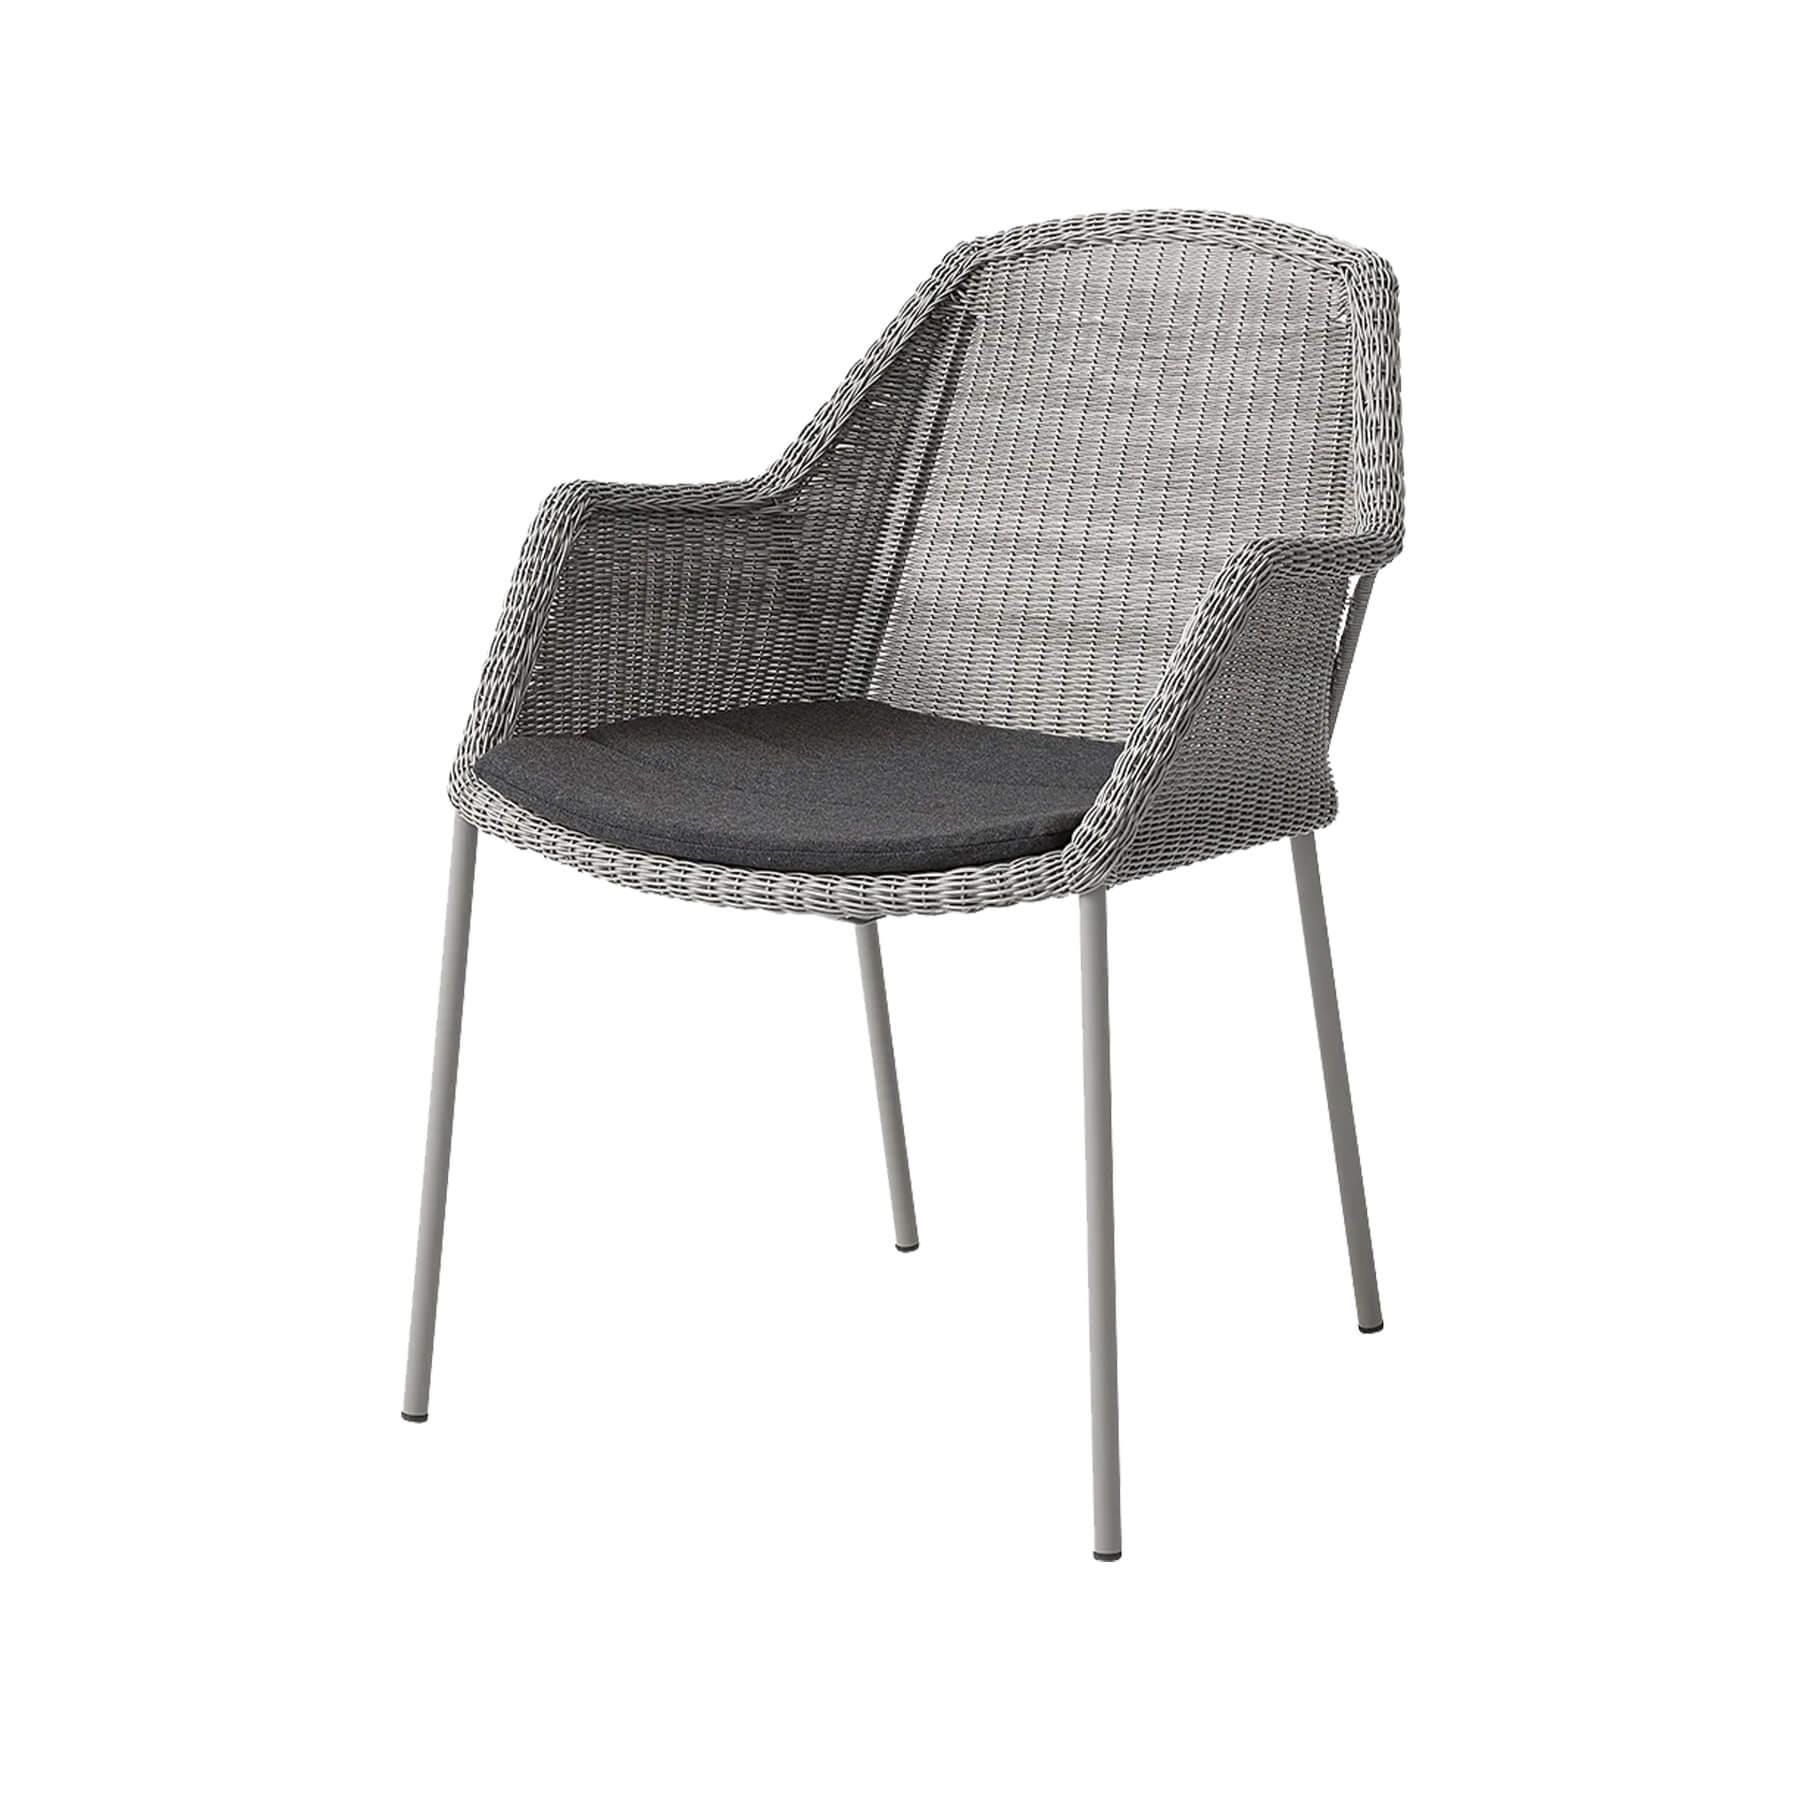 Caneline Breeze Outdoor Chair Taupe Seat Black Cushion Grey